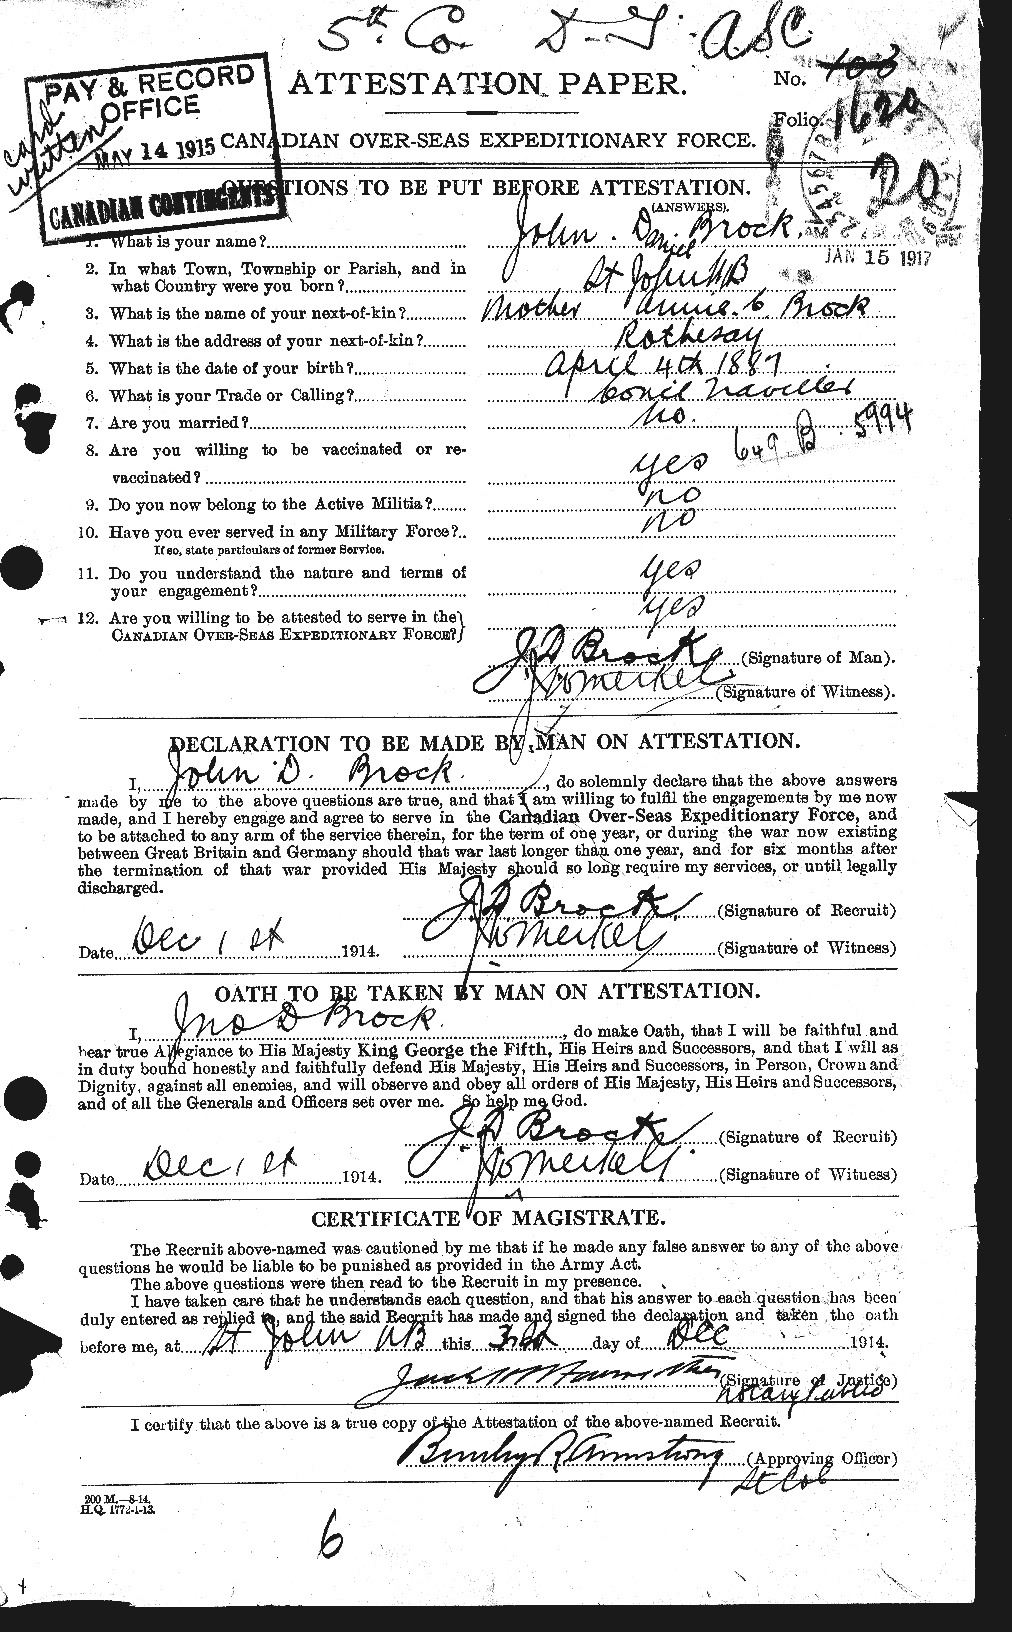 Personnel Records of the First World War - CEF 258219a